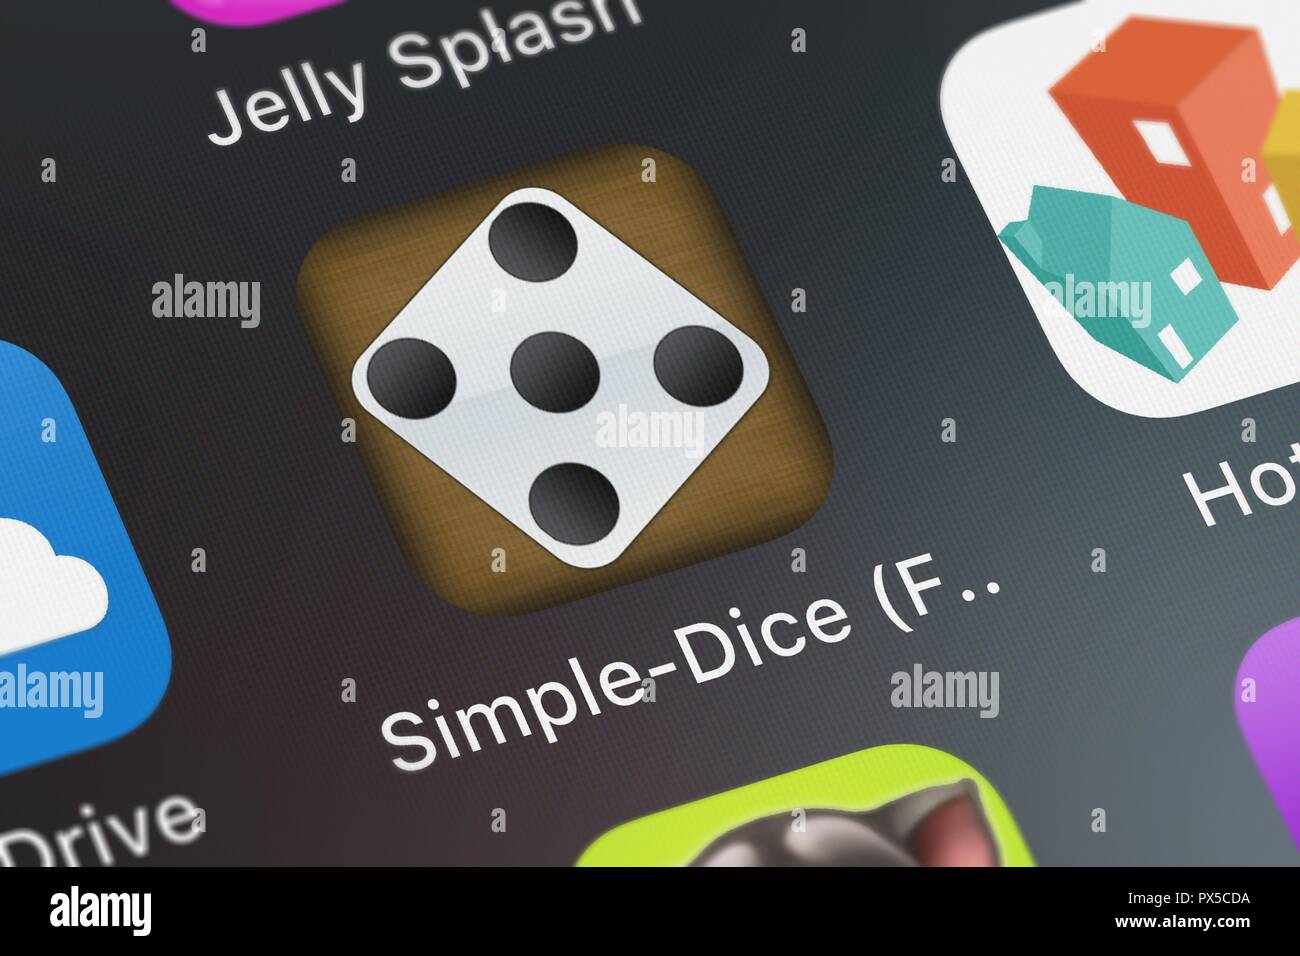 London, United Kingdom - October 19, 2018: Close-up shot of Ronald Bell's popular app Simple-Dice (FREE). Stock Photo